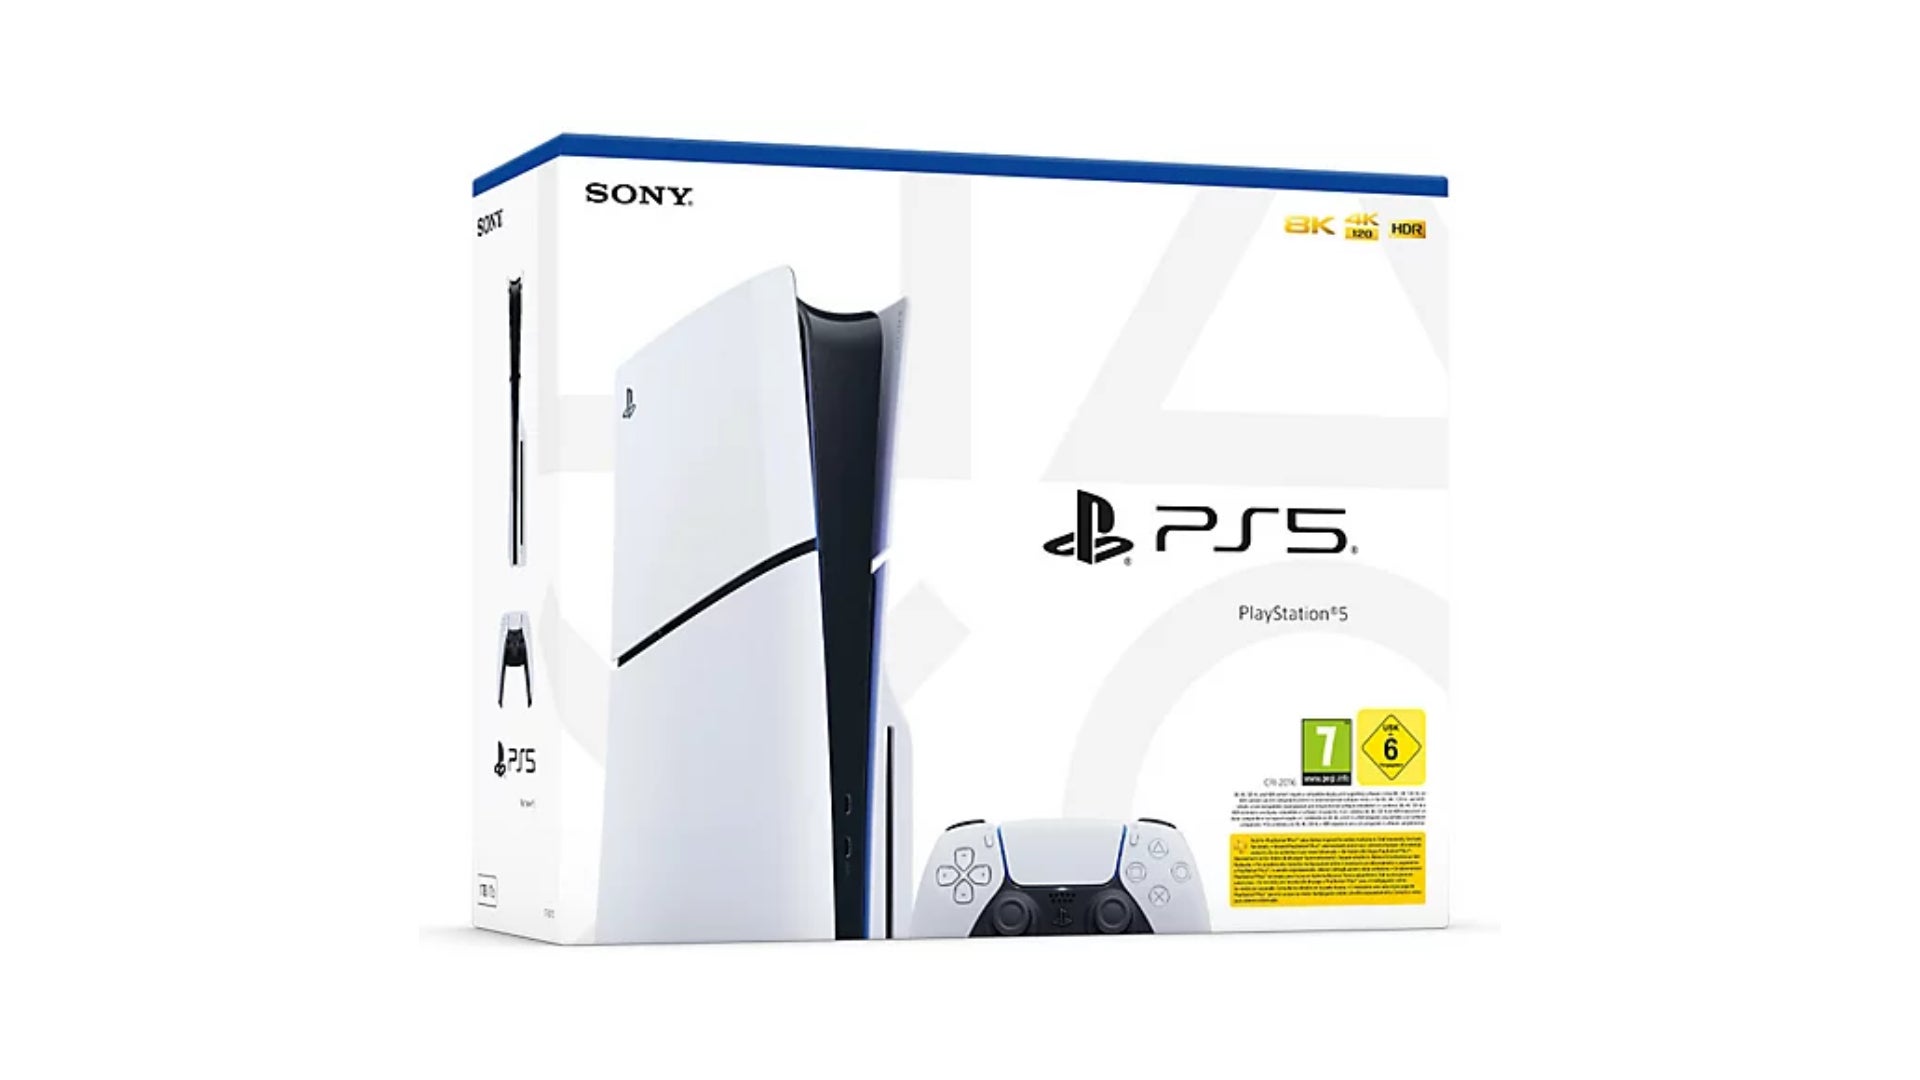 The PS5 Slim Disc console is now only £409 at Very, Currys and 